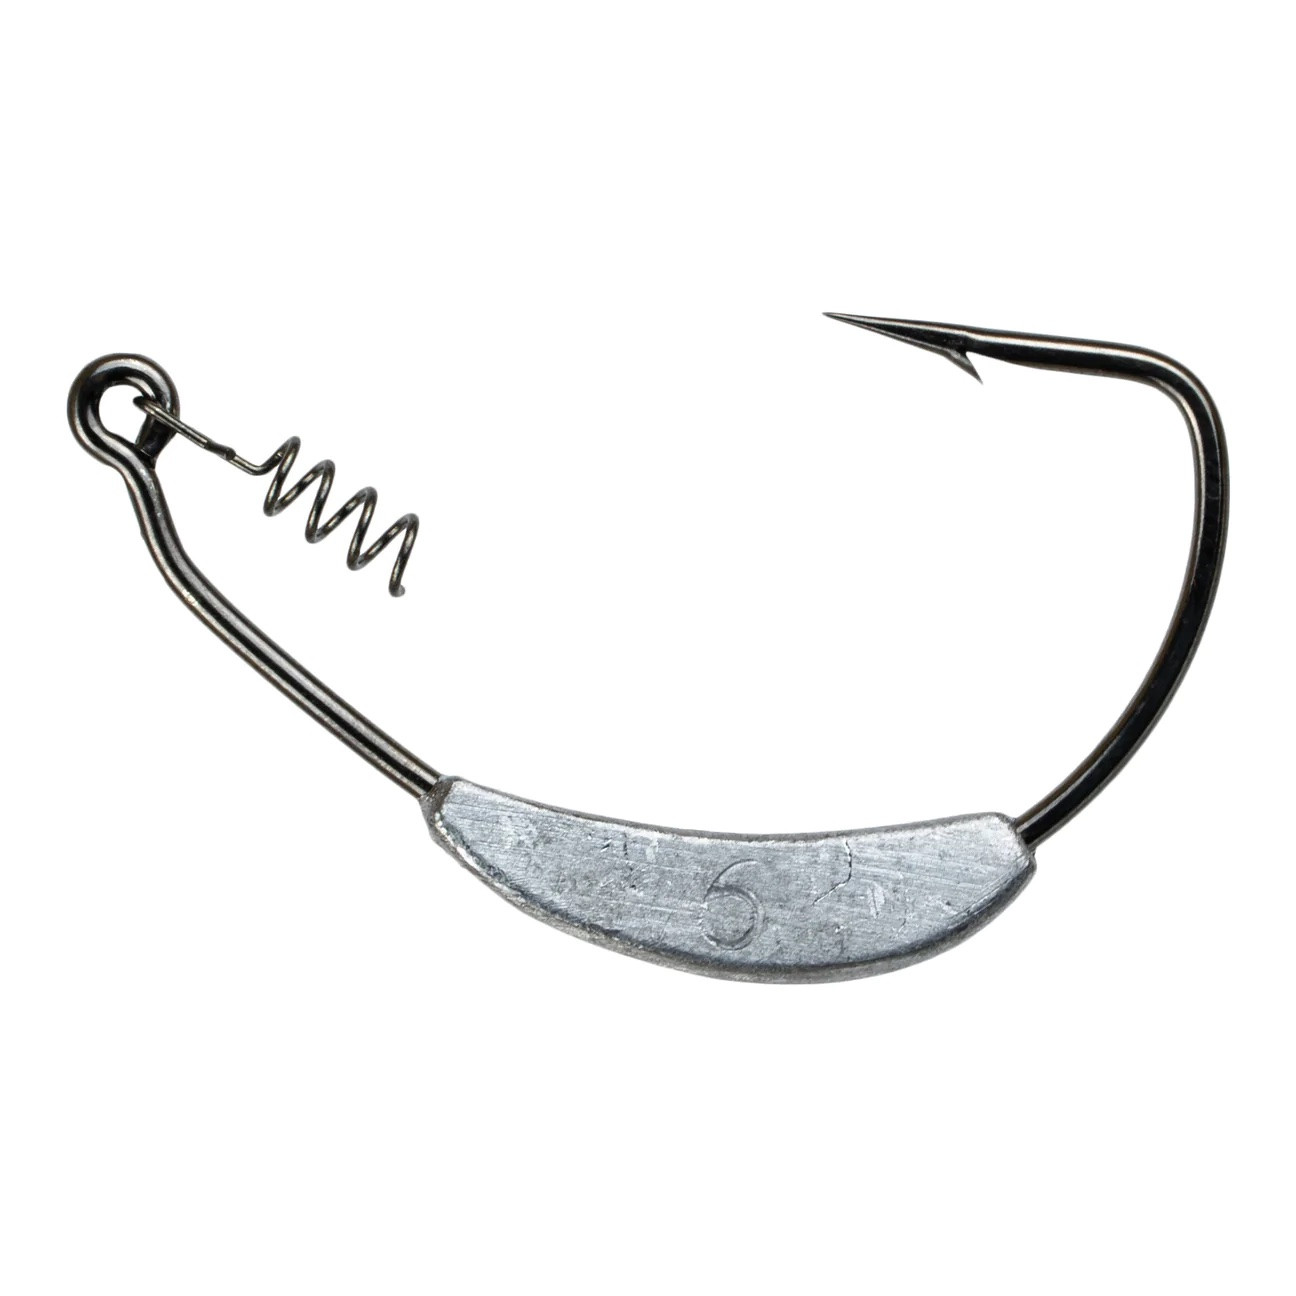 Keel Weighted Hooks